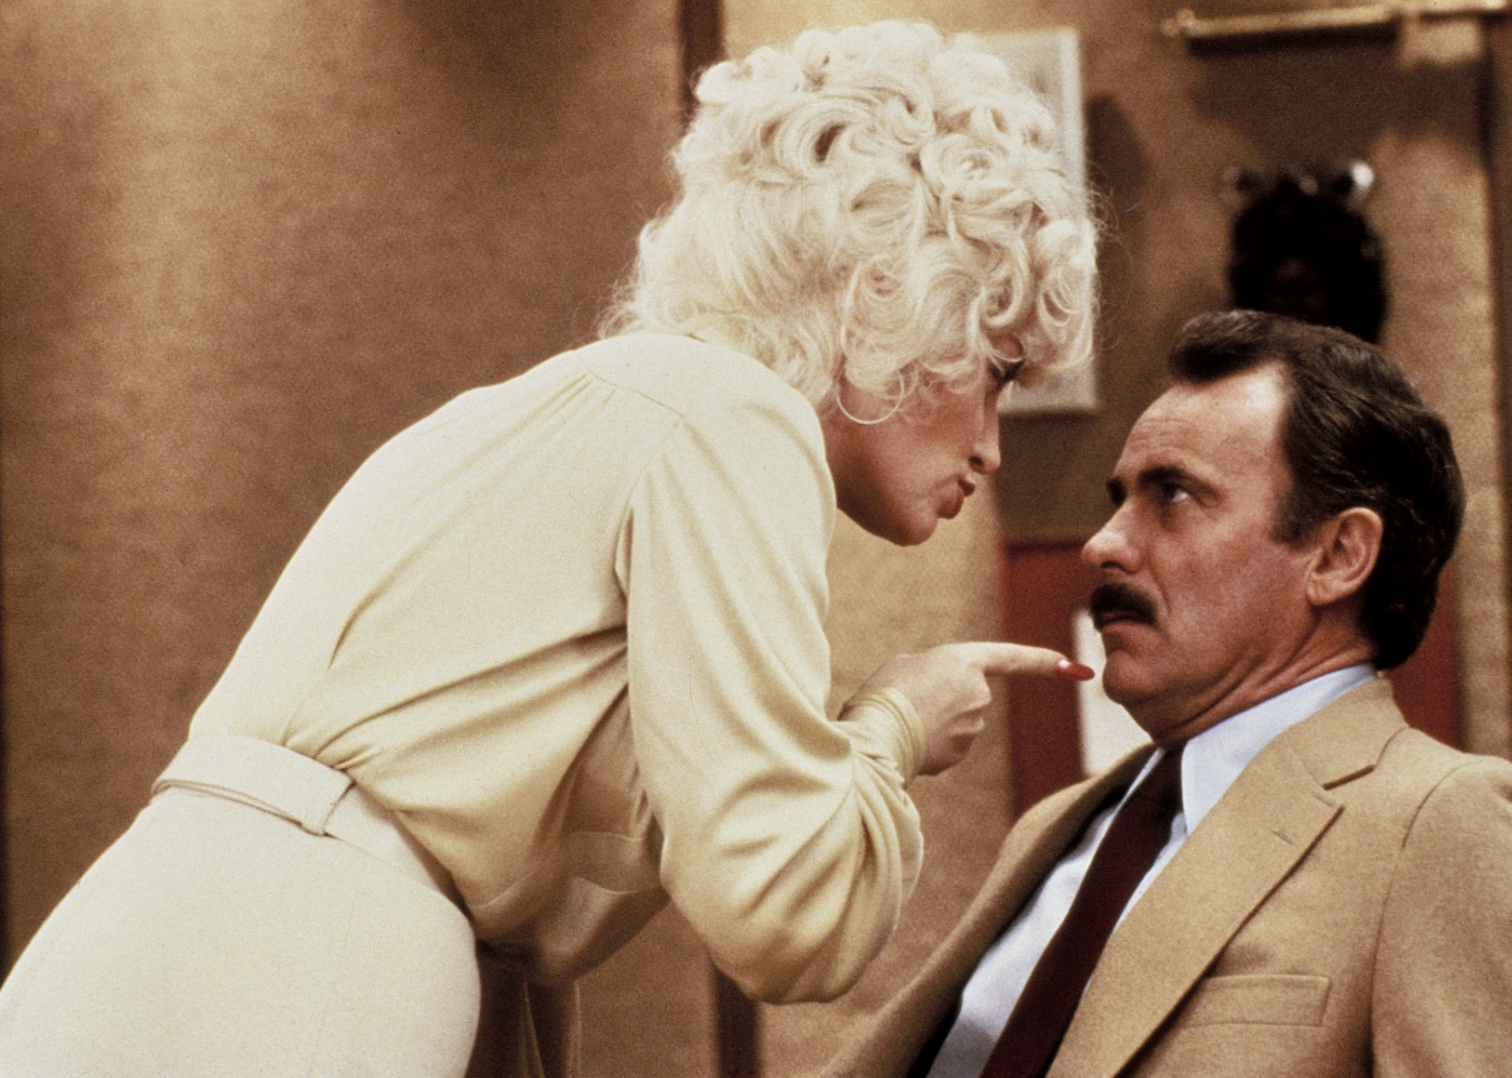 Dolly Parton and Dabney Coleman in "9 to 5"